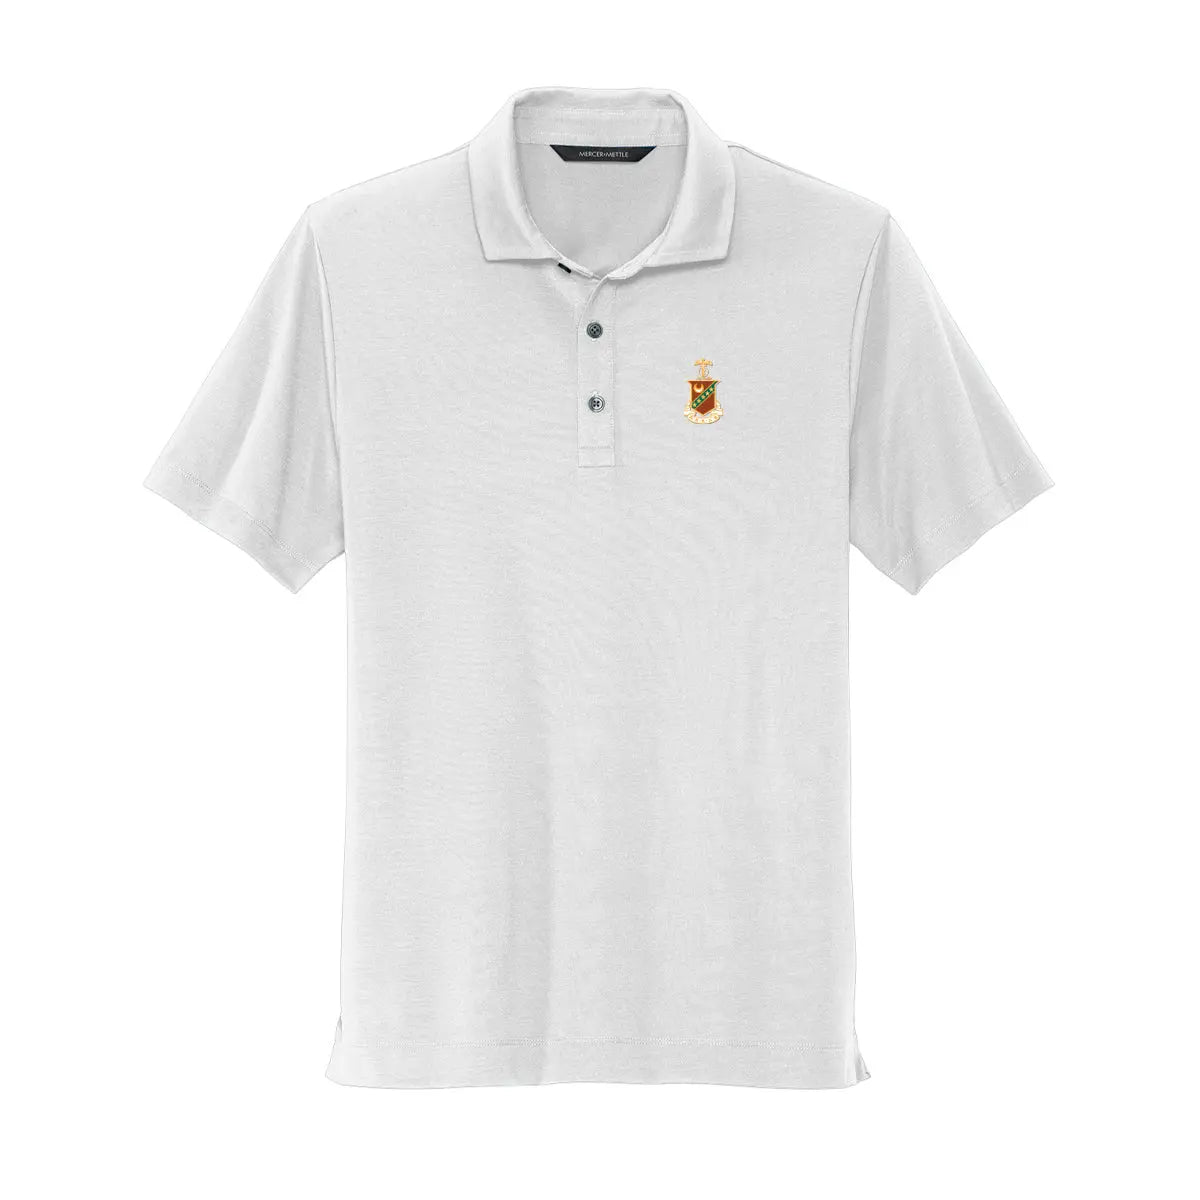 Kappa Sig White Crest Polo - Kappa Sigma Official Store